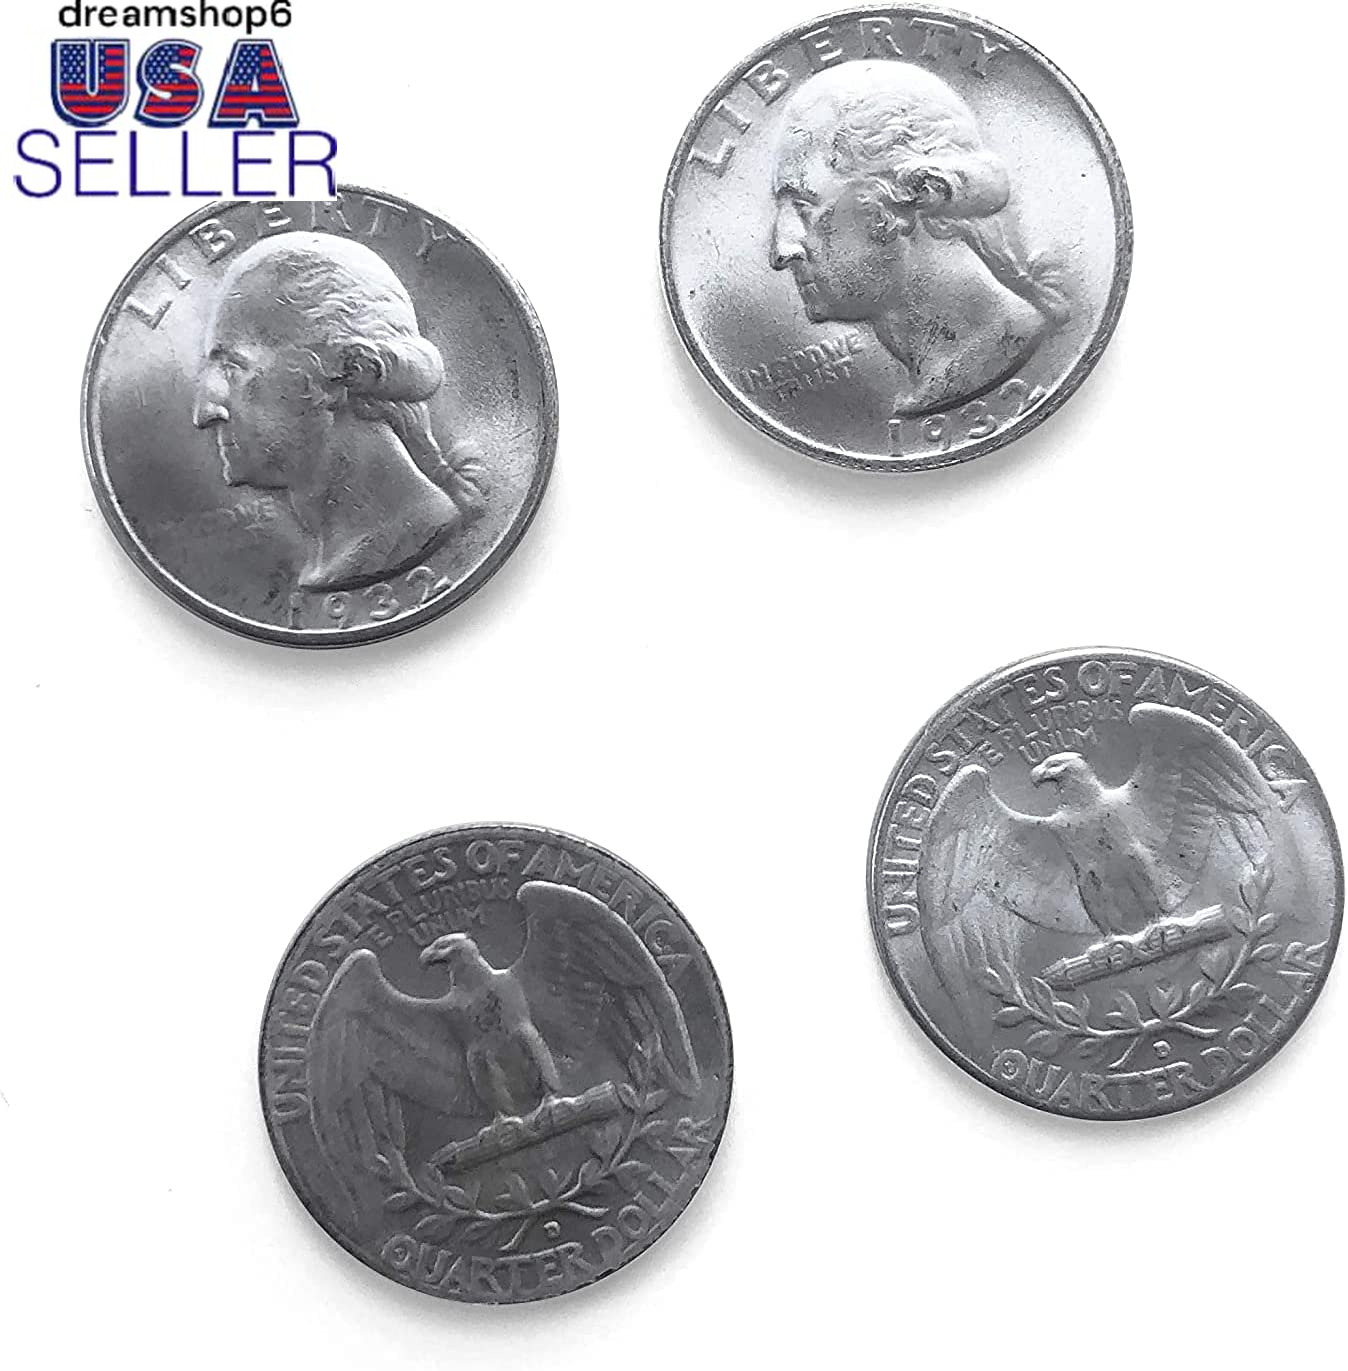 2-Pack Double-Sided Quarters, 1 Double-Sided Heads Coin and 1 Double-Sided Tails